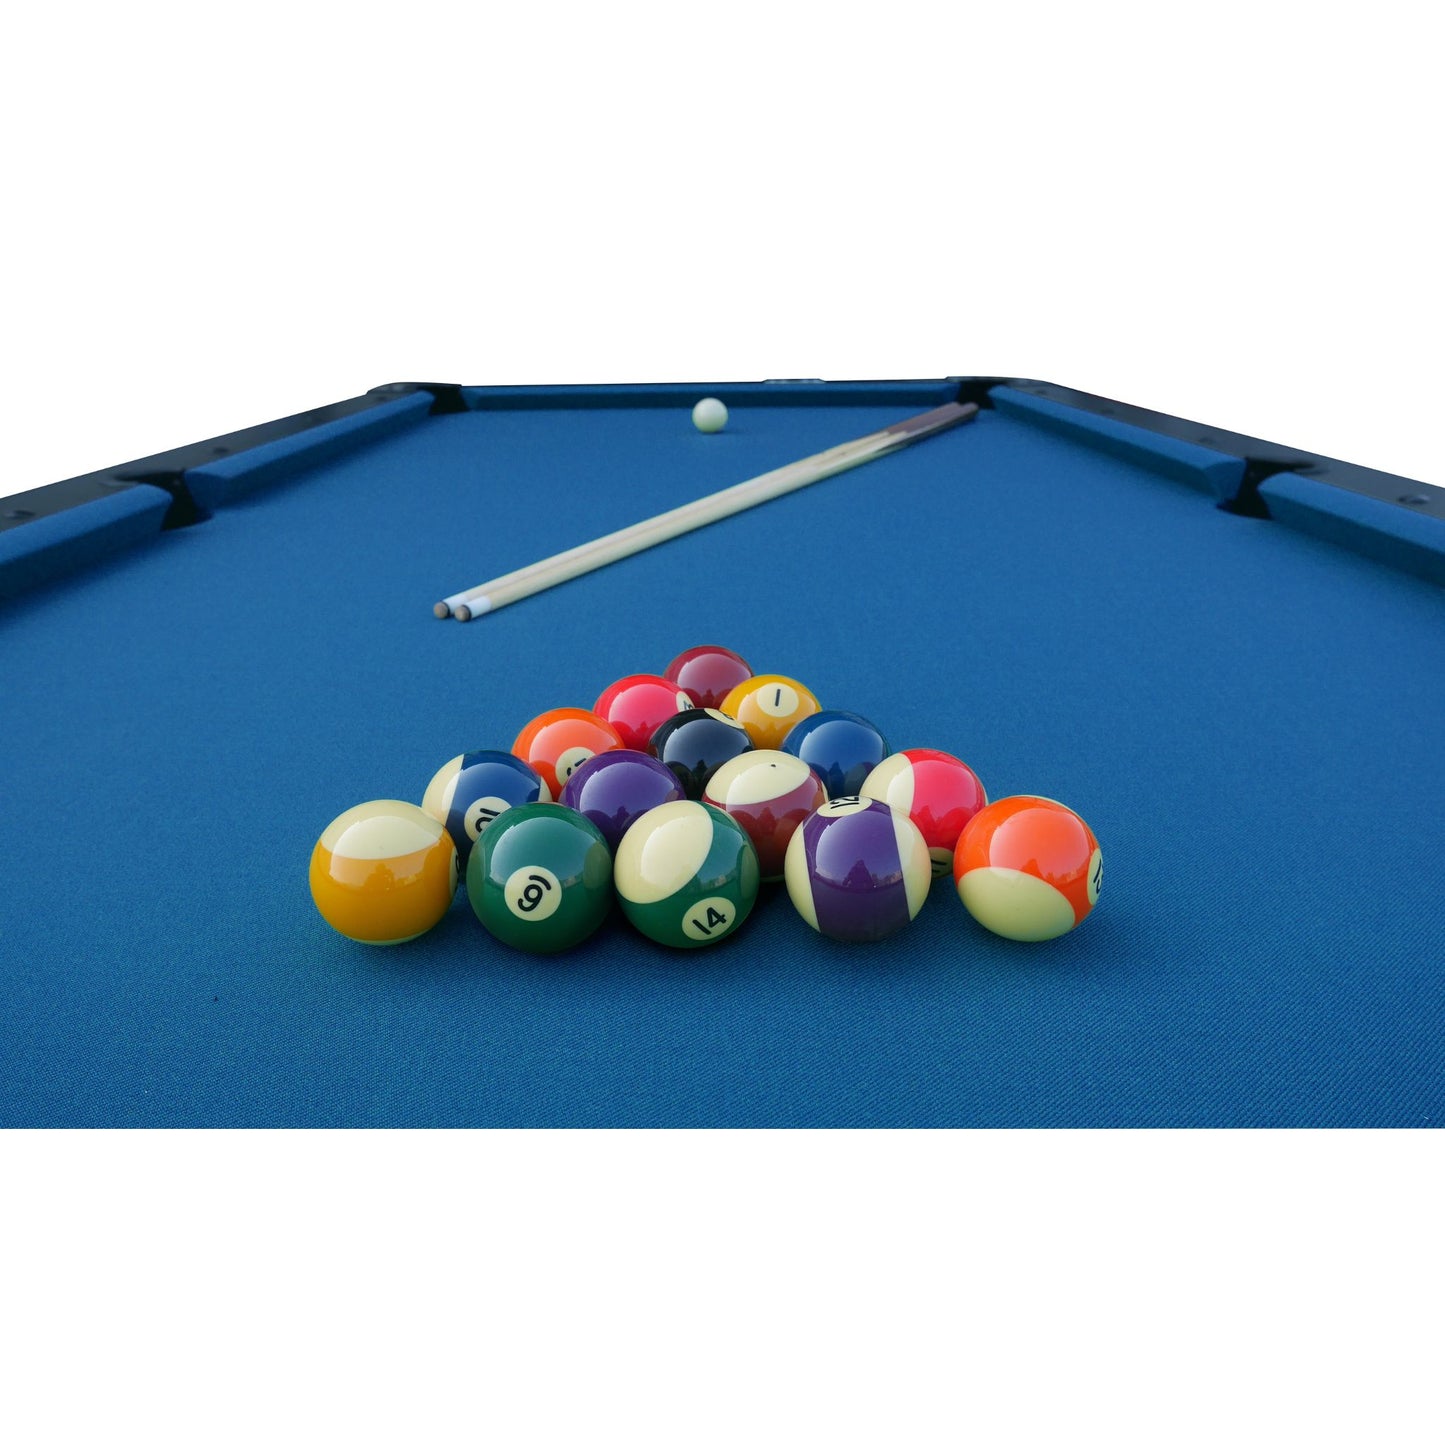 First Pool 6ft-8ft Size | American Pool Table